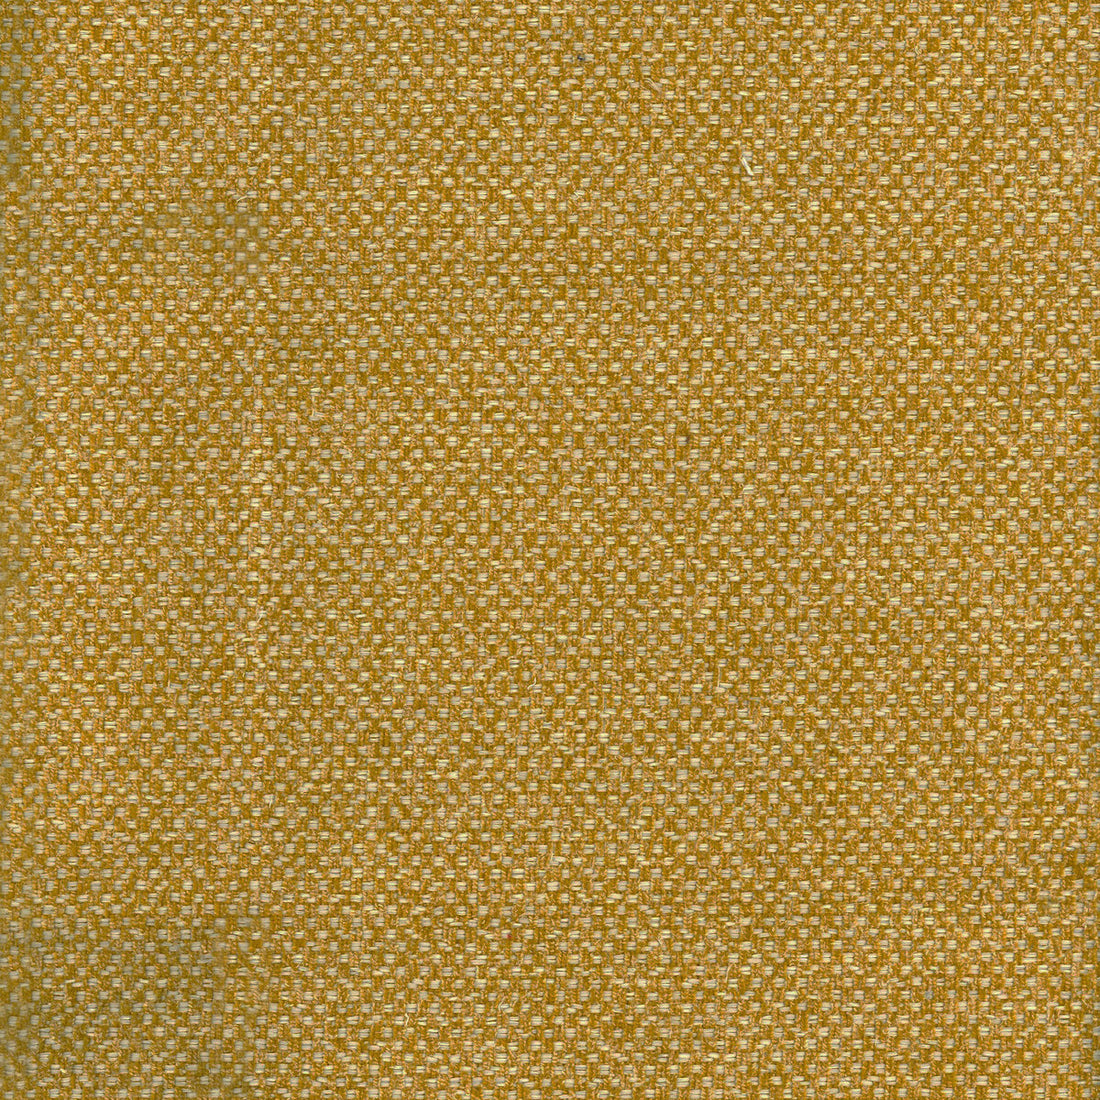 Yosemite fabric in eagle color - pattern AM100332.4.0 - by Kravet Couture in the Andrew Martin Canyon collection